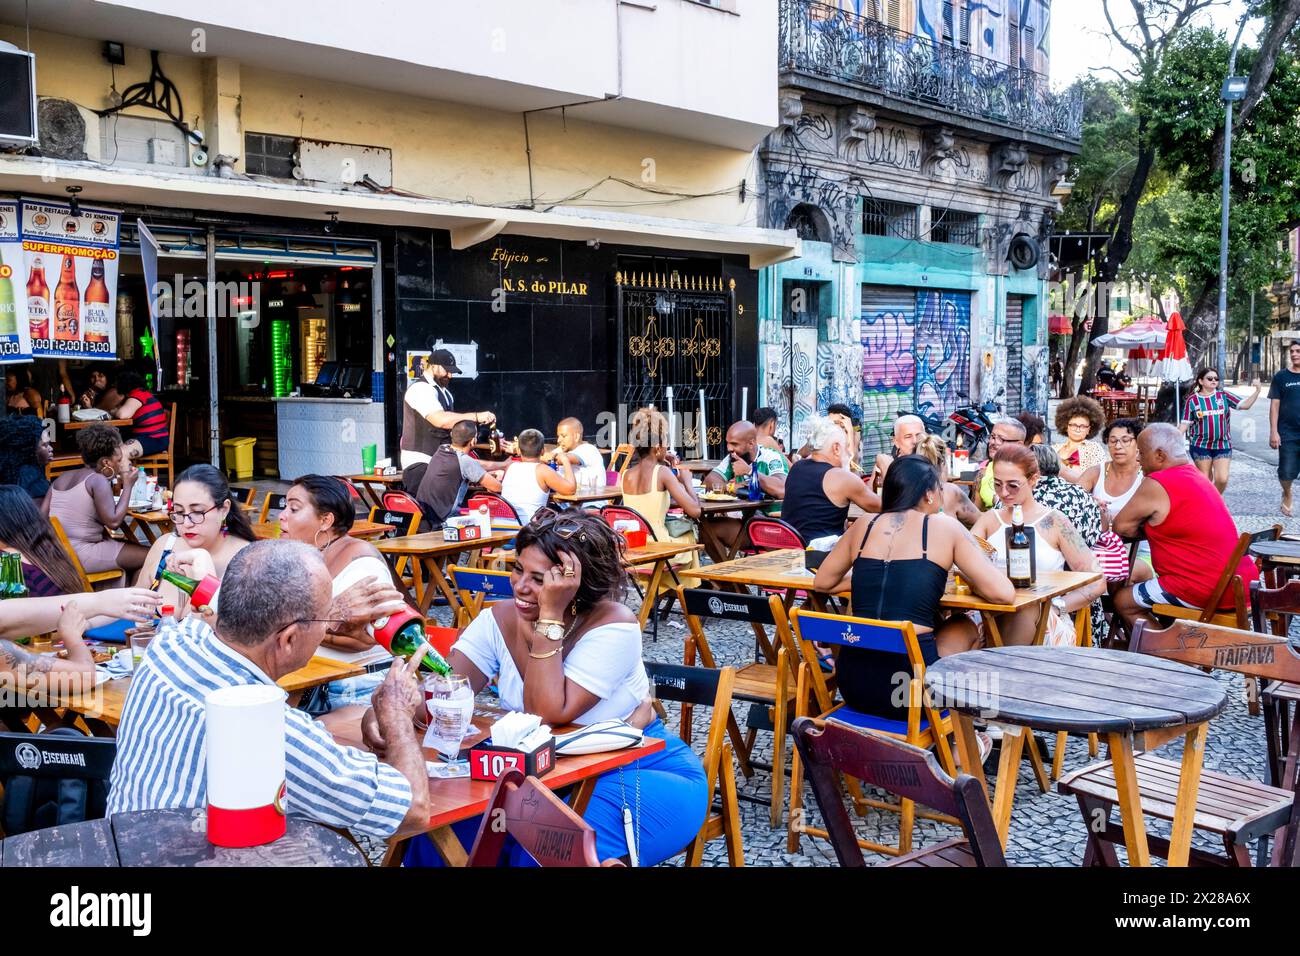 People Outside A Cafe In The Lapa District of Rio de Janeiro, Brasil. Stock Photo